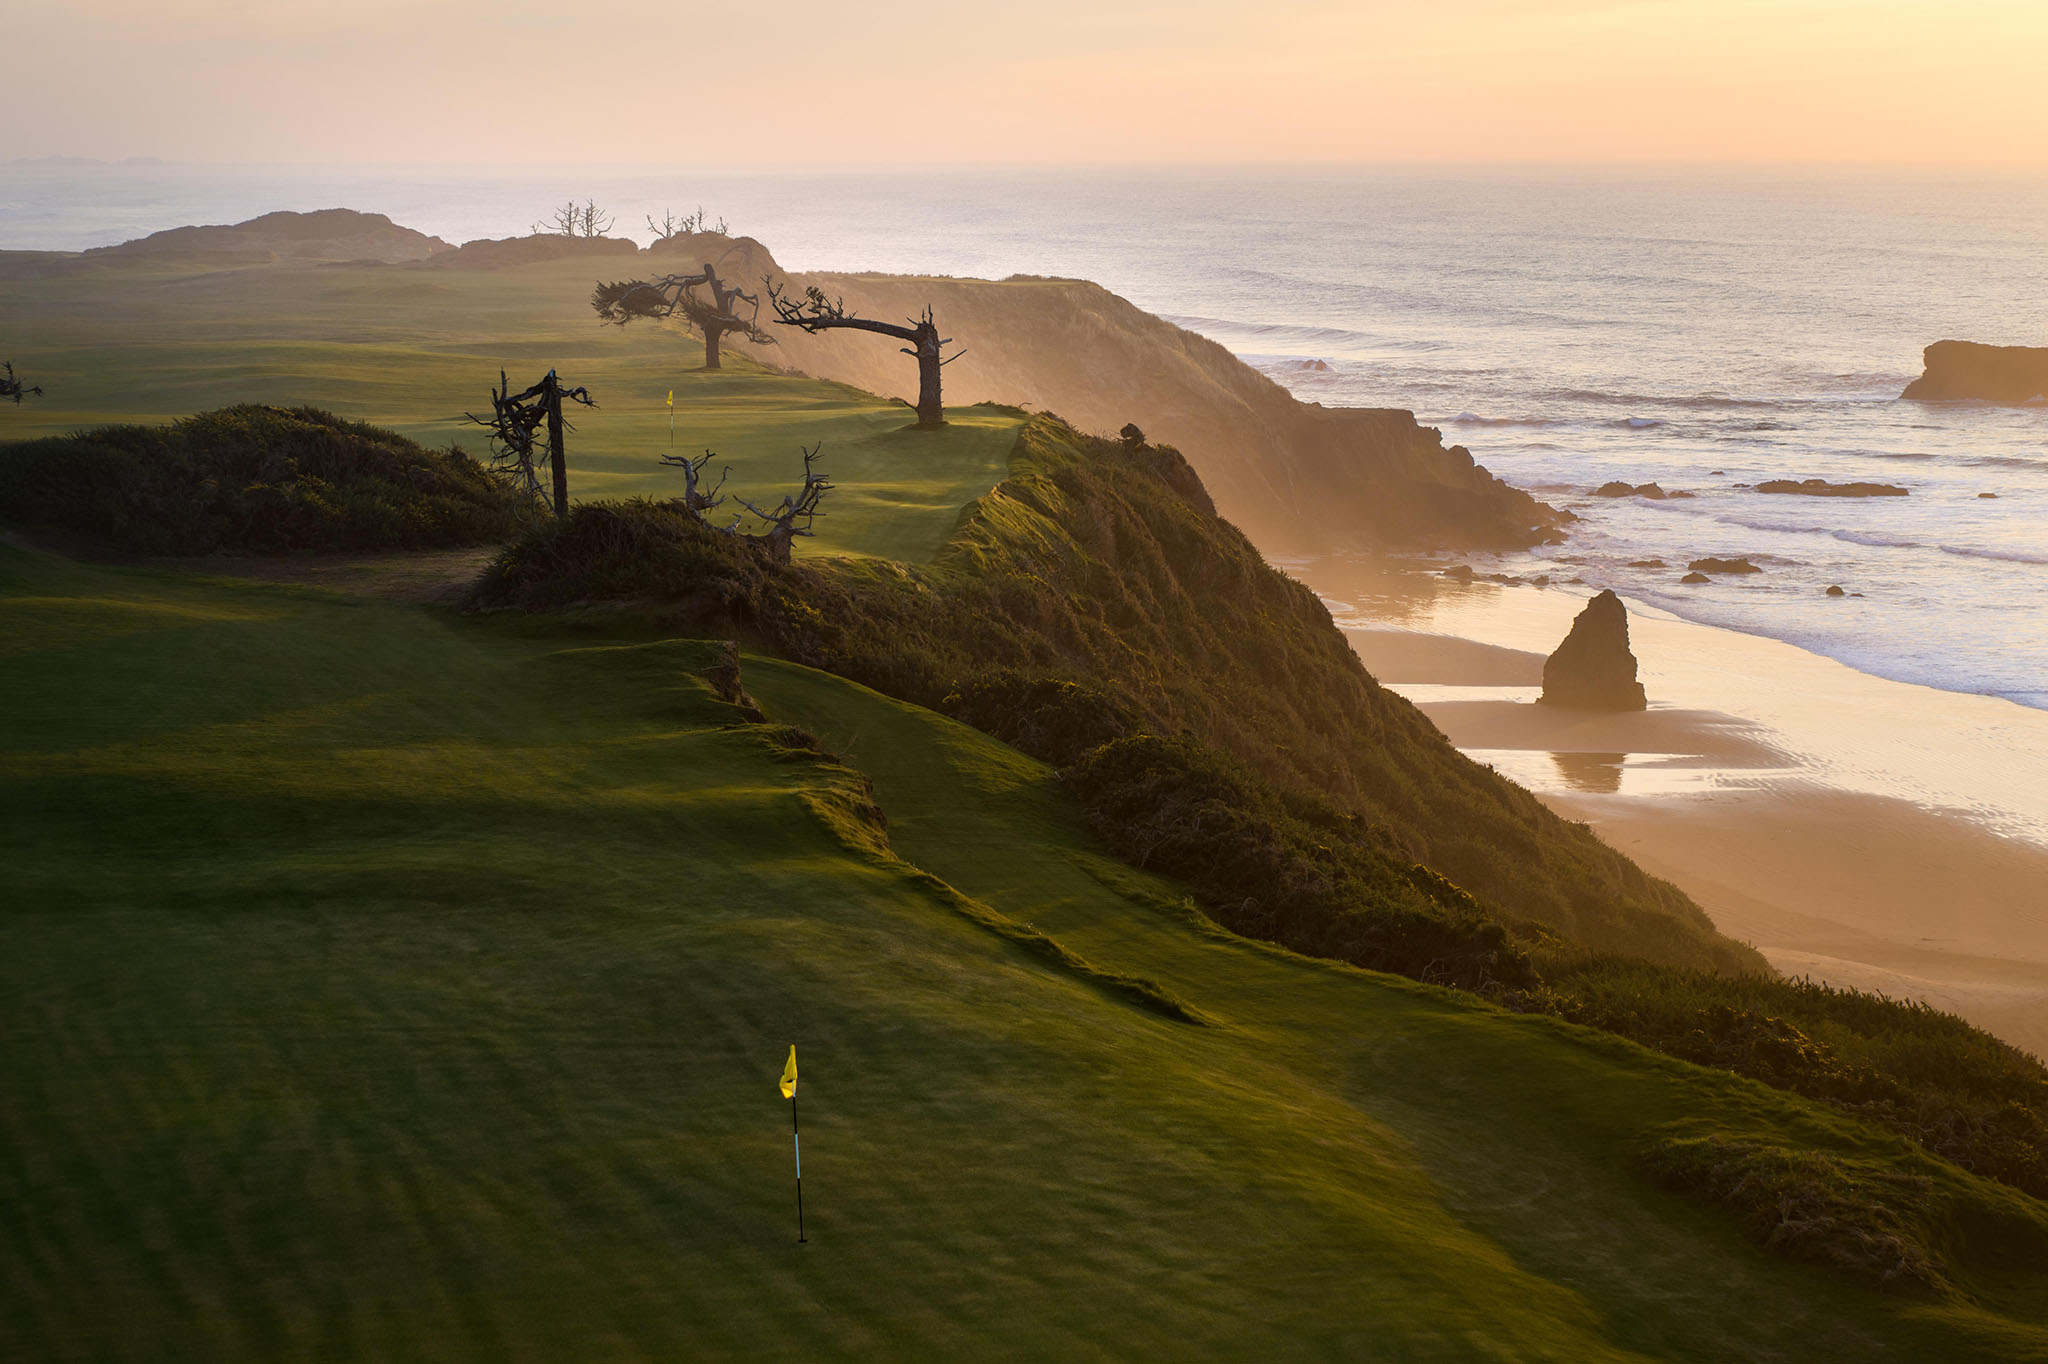 The Sheep Ranch: A spectacular addition to Bandon Dunes